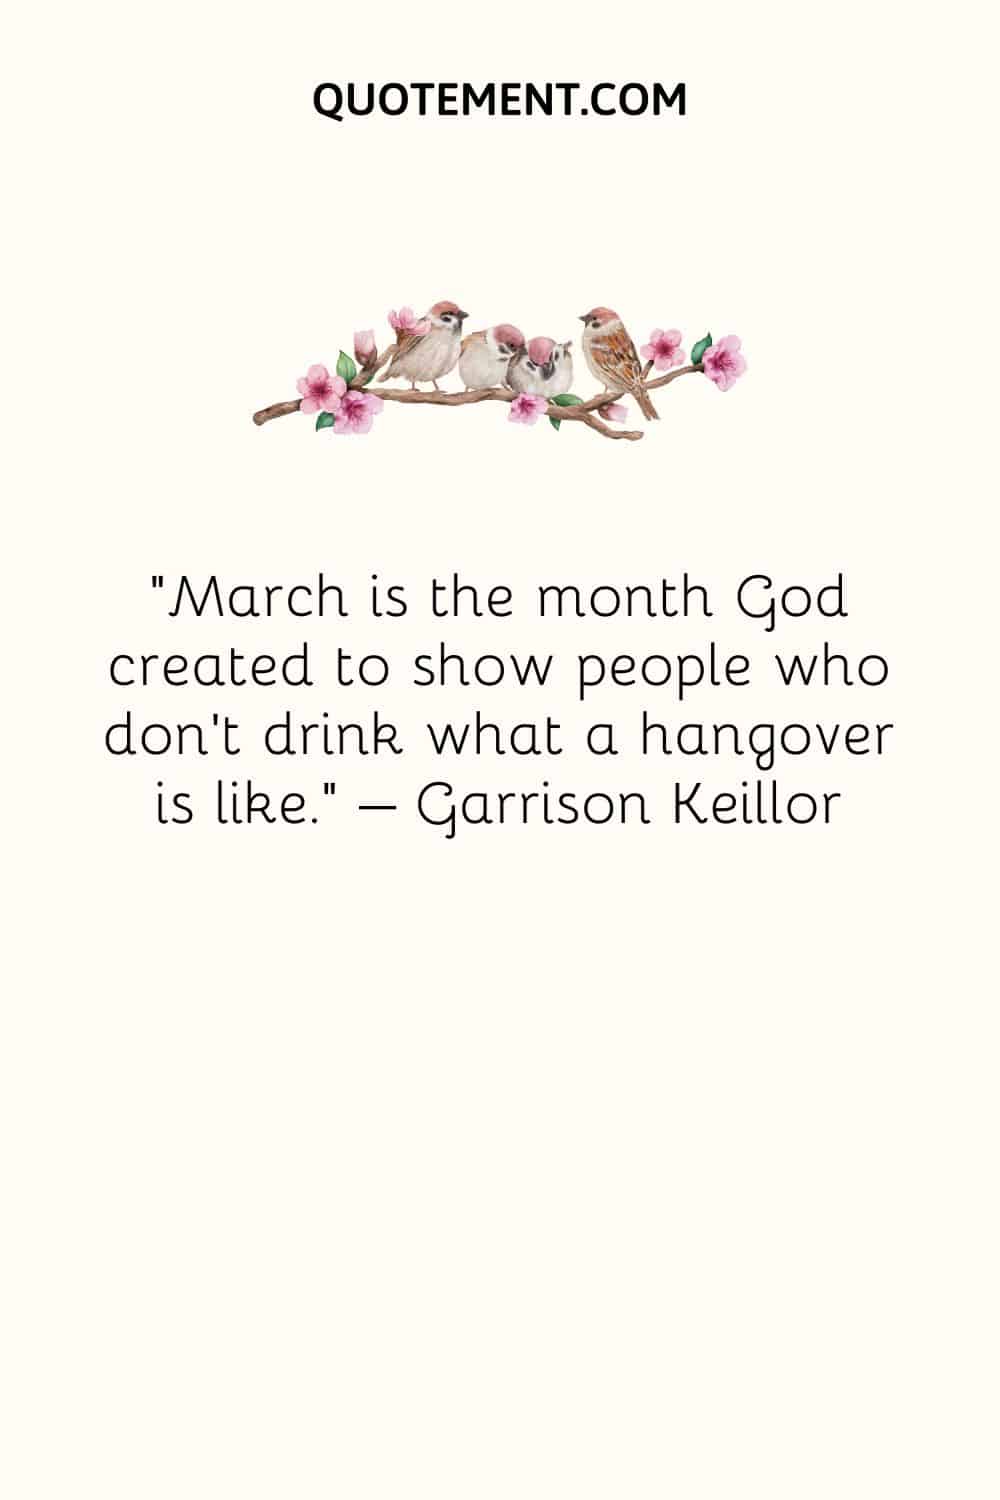 March is the month God created to show people who don’t drink what a hangover is like. – Garrison Keillor